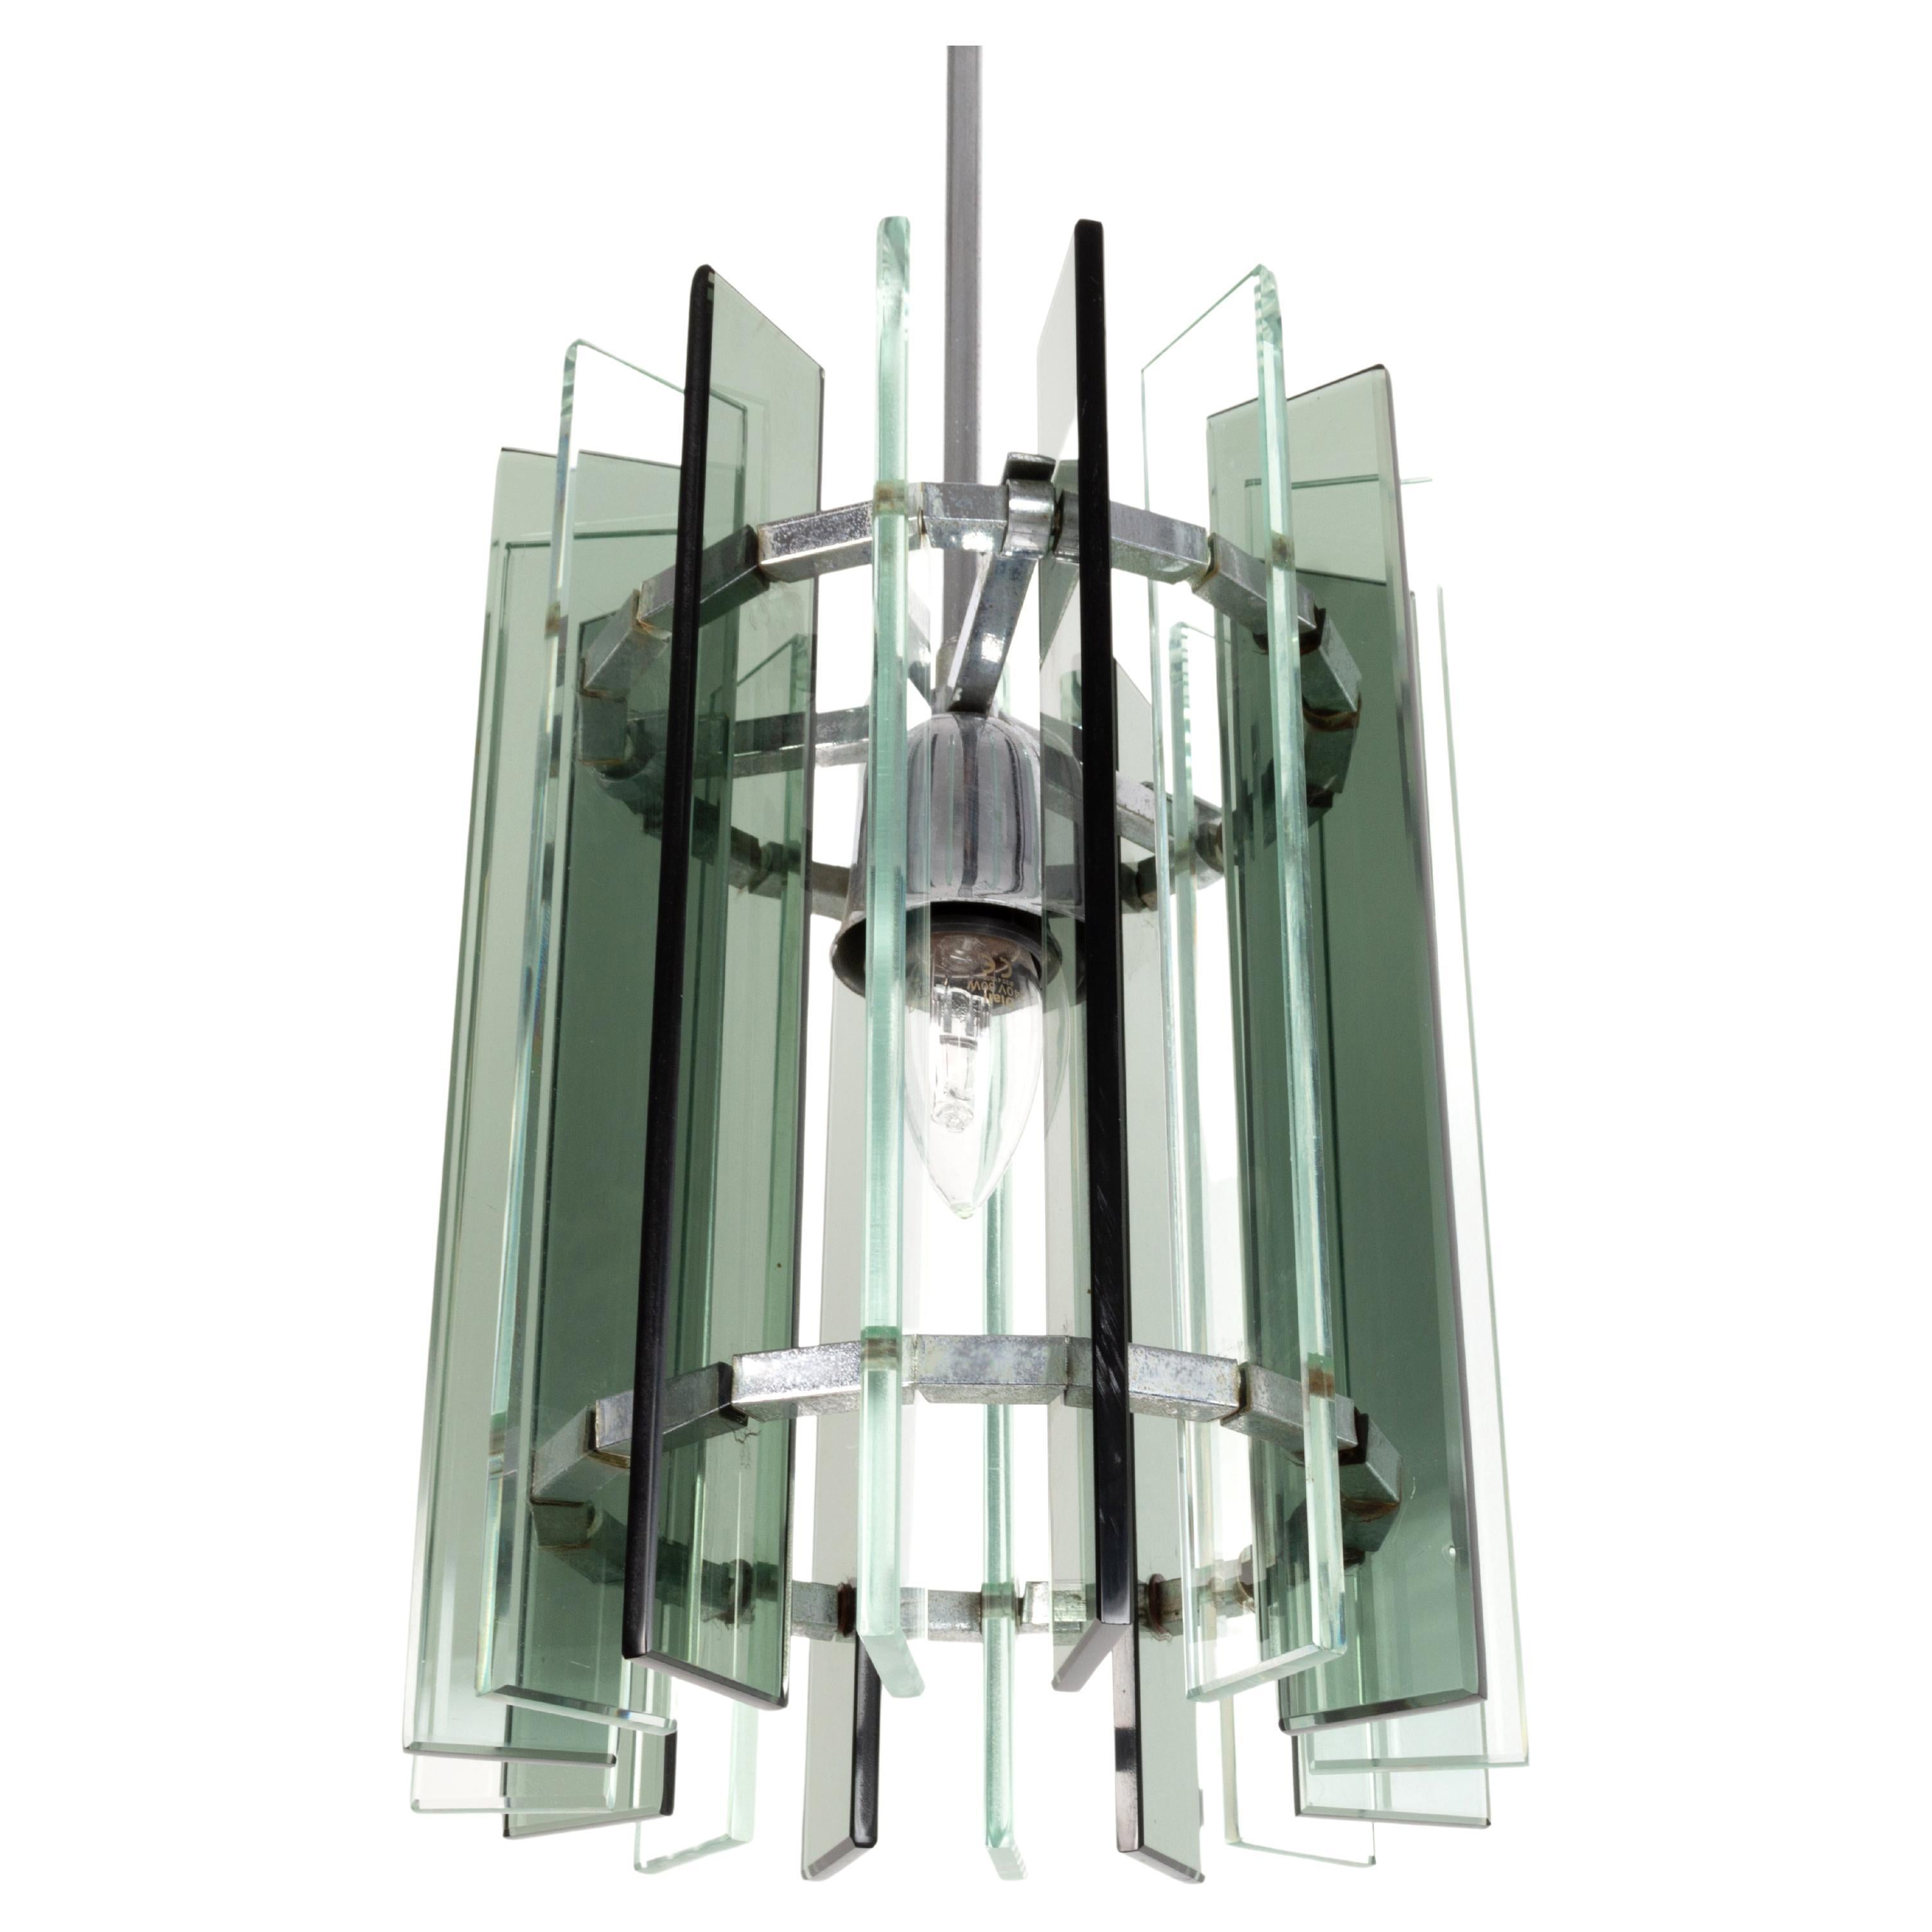 Mid-Century Modern Italian glass and nickel pendant light.
In the manner of Max Ingrand for Fontana Arte.
Thick green glass with a single central light source.

Excellent condition commensurate of age. Free from chips.

Measures: Overall drop: